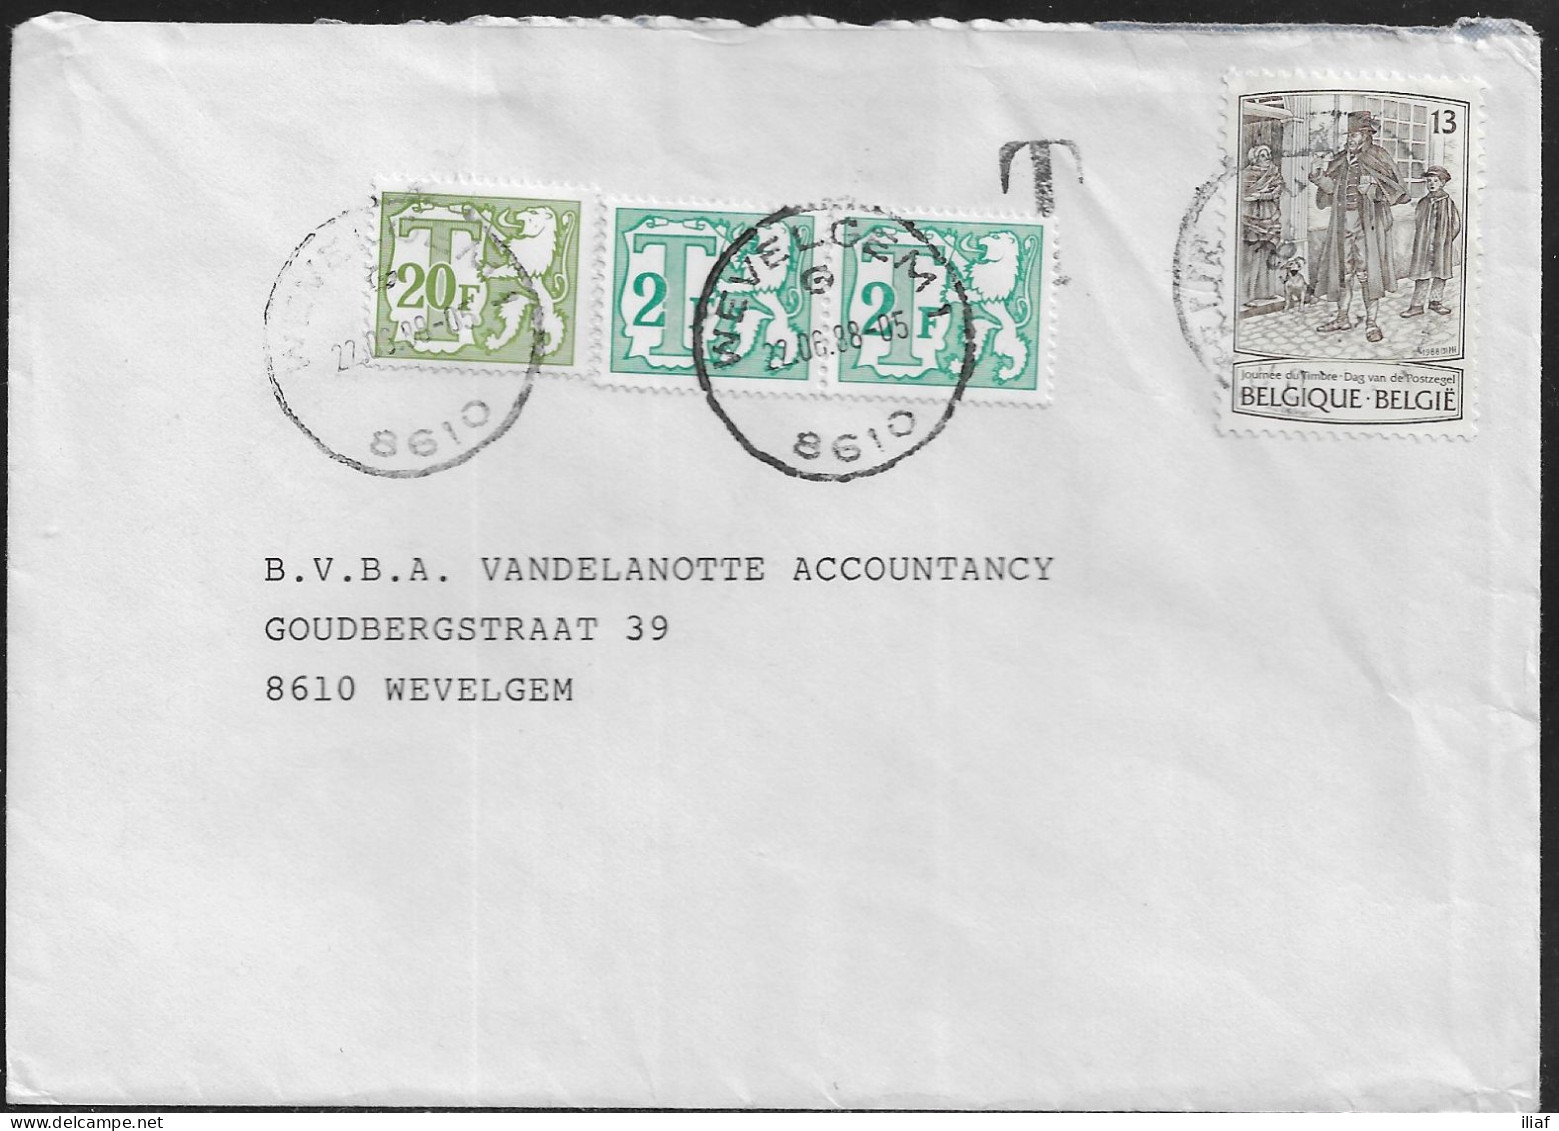 Belgium. Stamps Sc. 1091, J63, J78 On Commercial Letter, Taxed - Postage Due Stamps, Sent From Wevelgem On 22.06.1988 - Covers & Documents